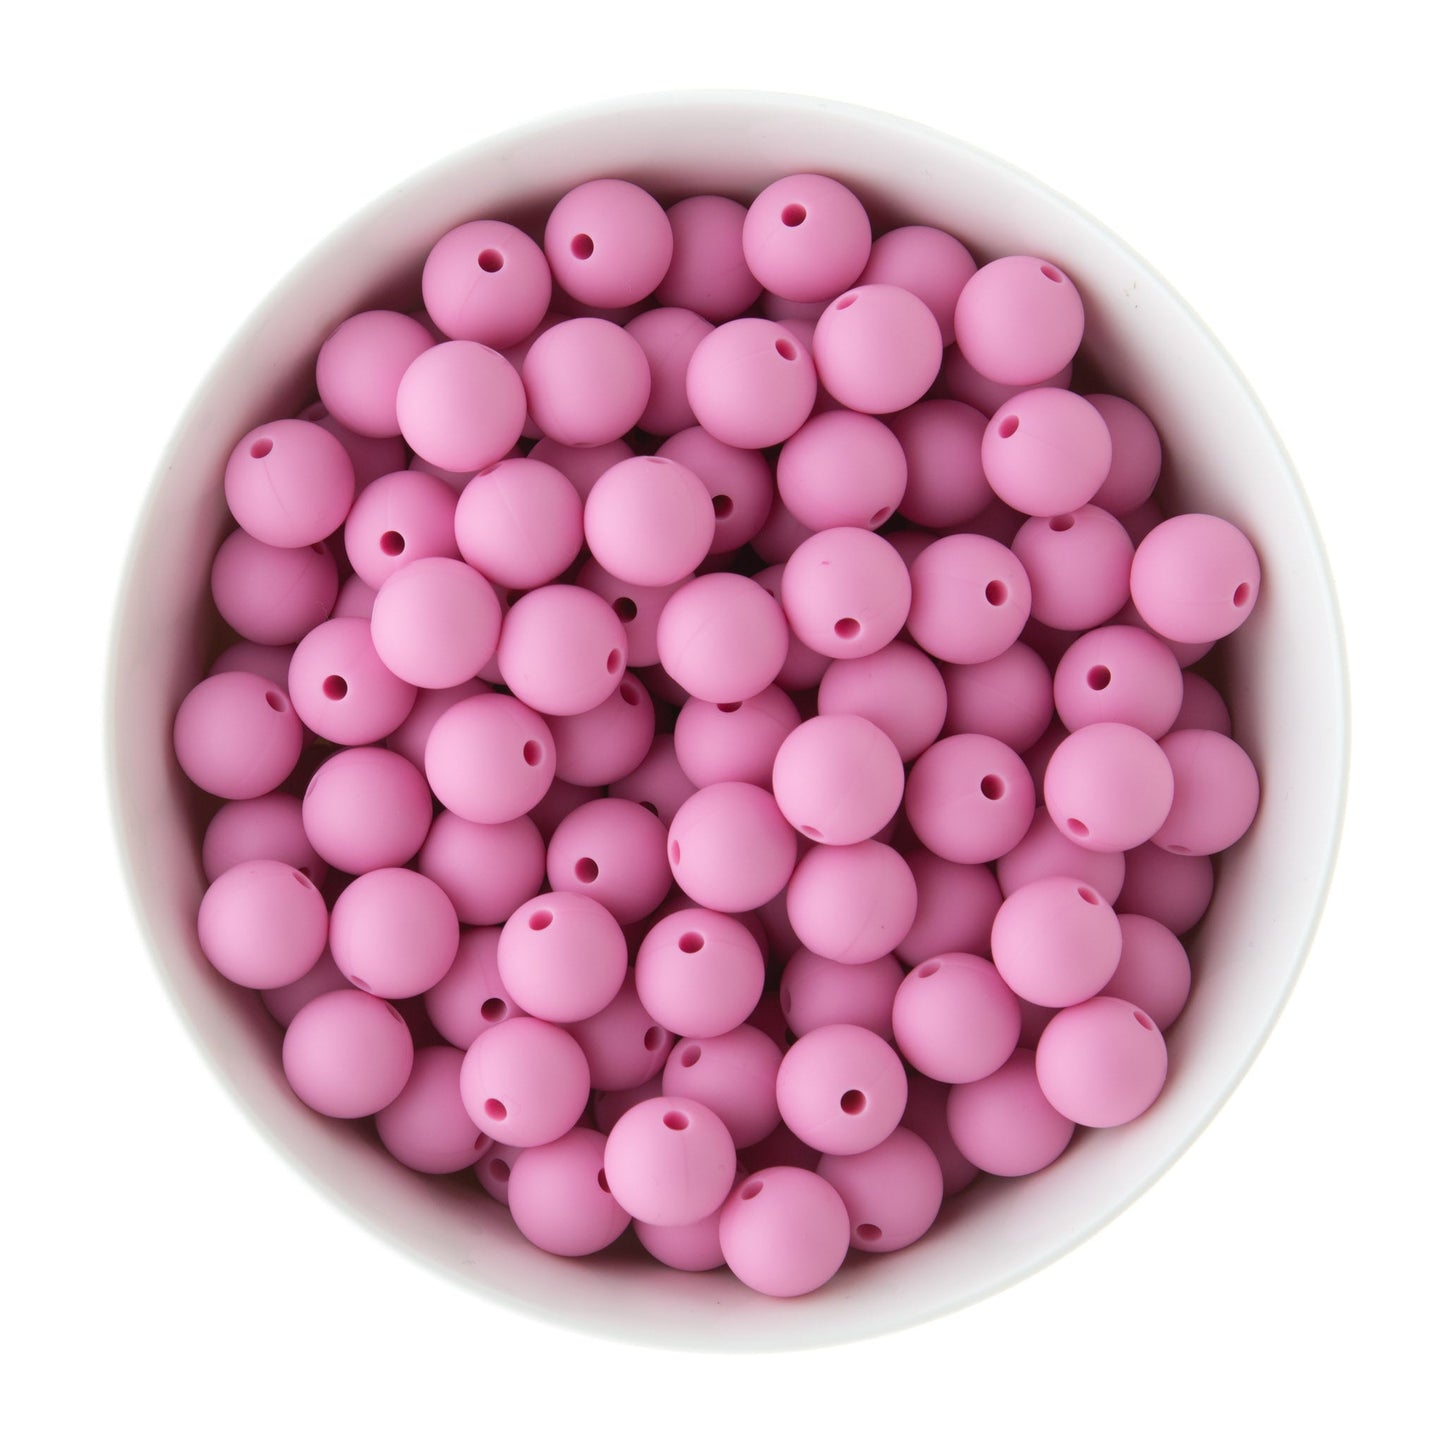 12mm Round Silicone Beads